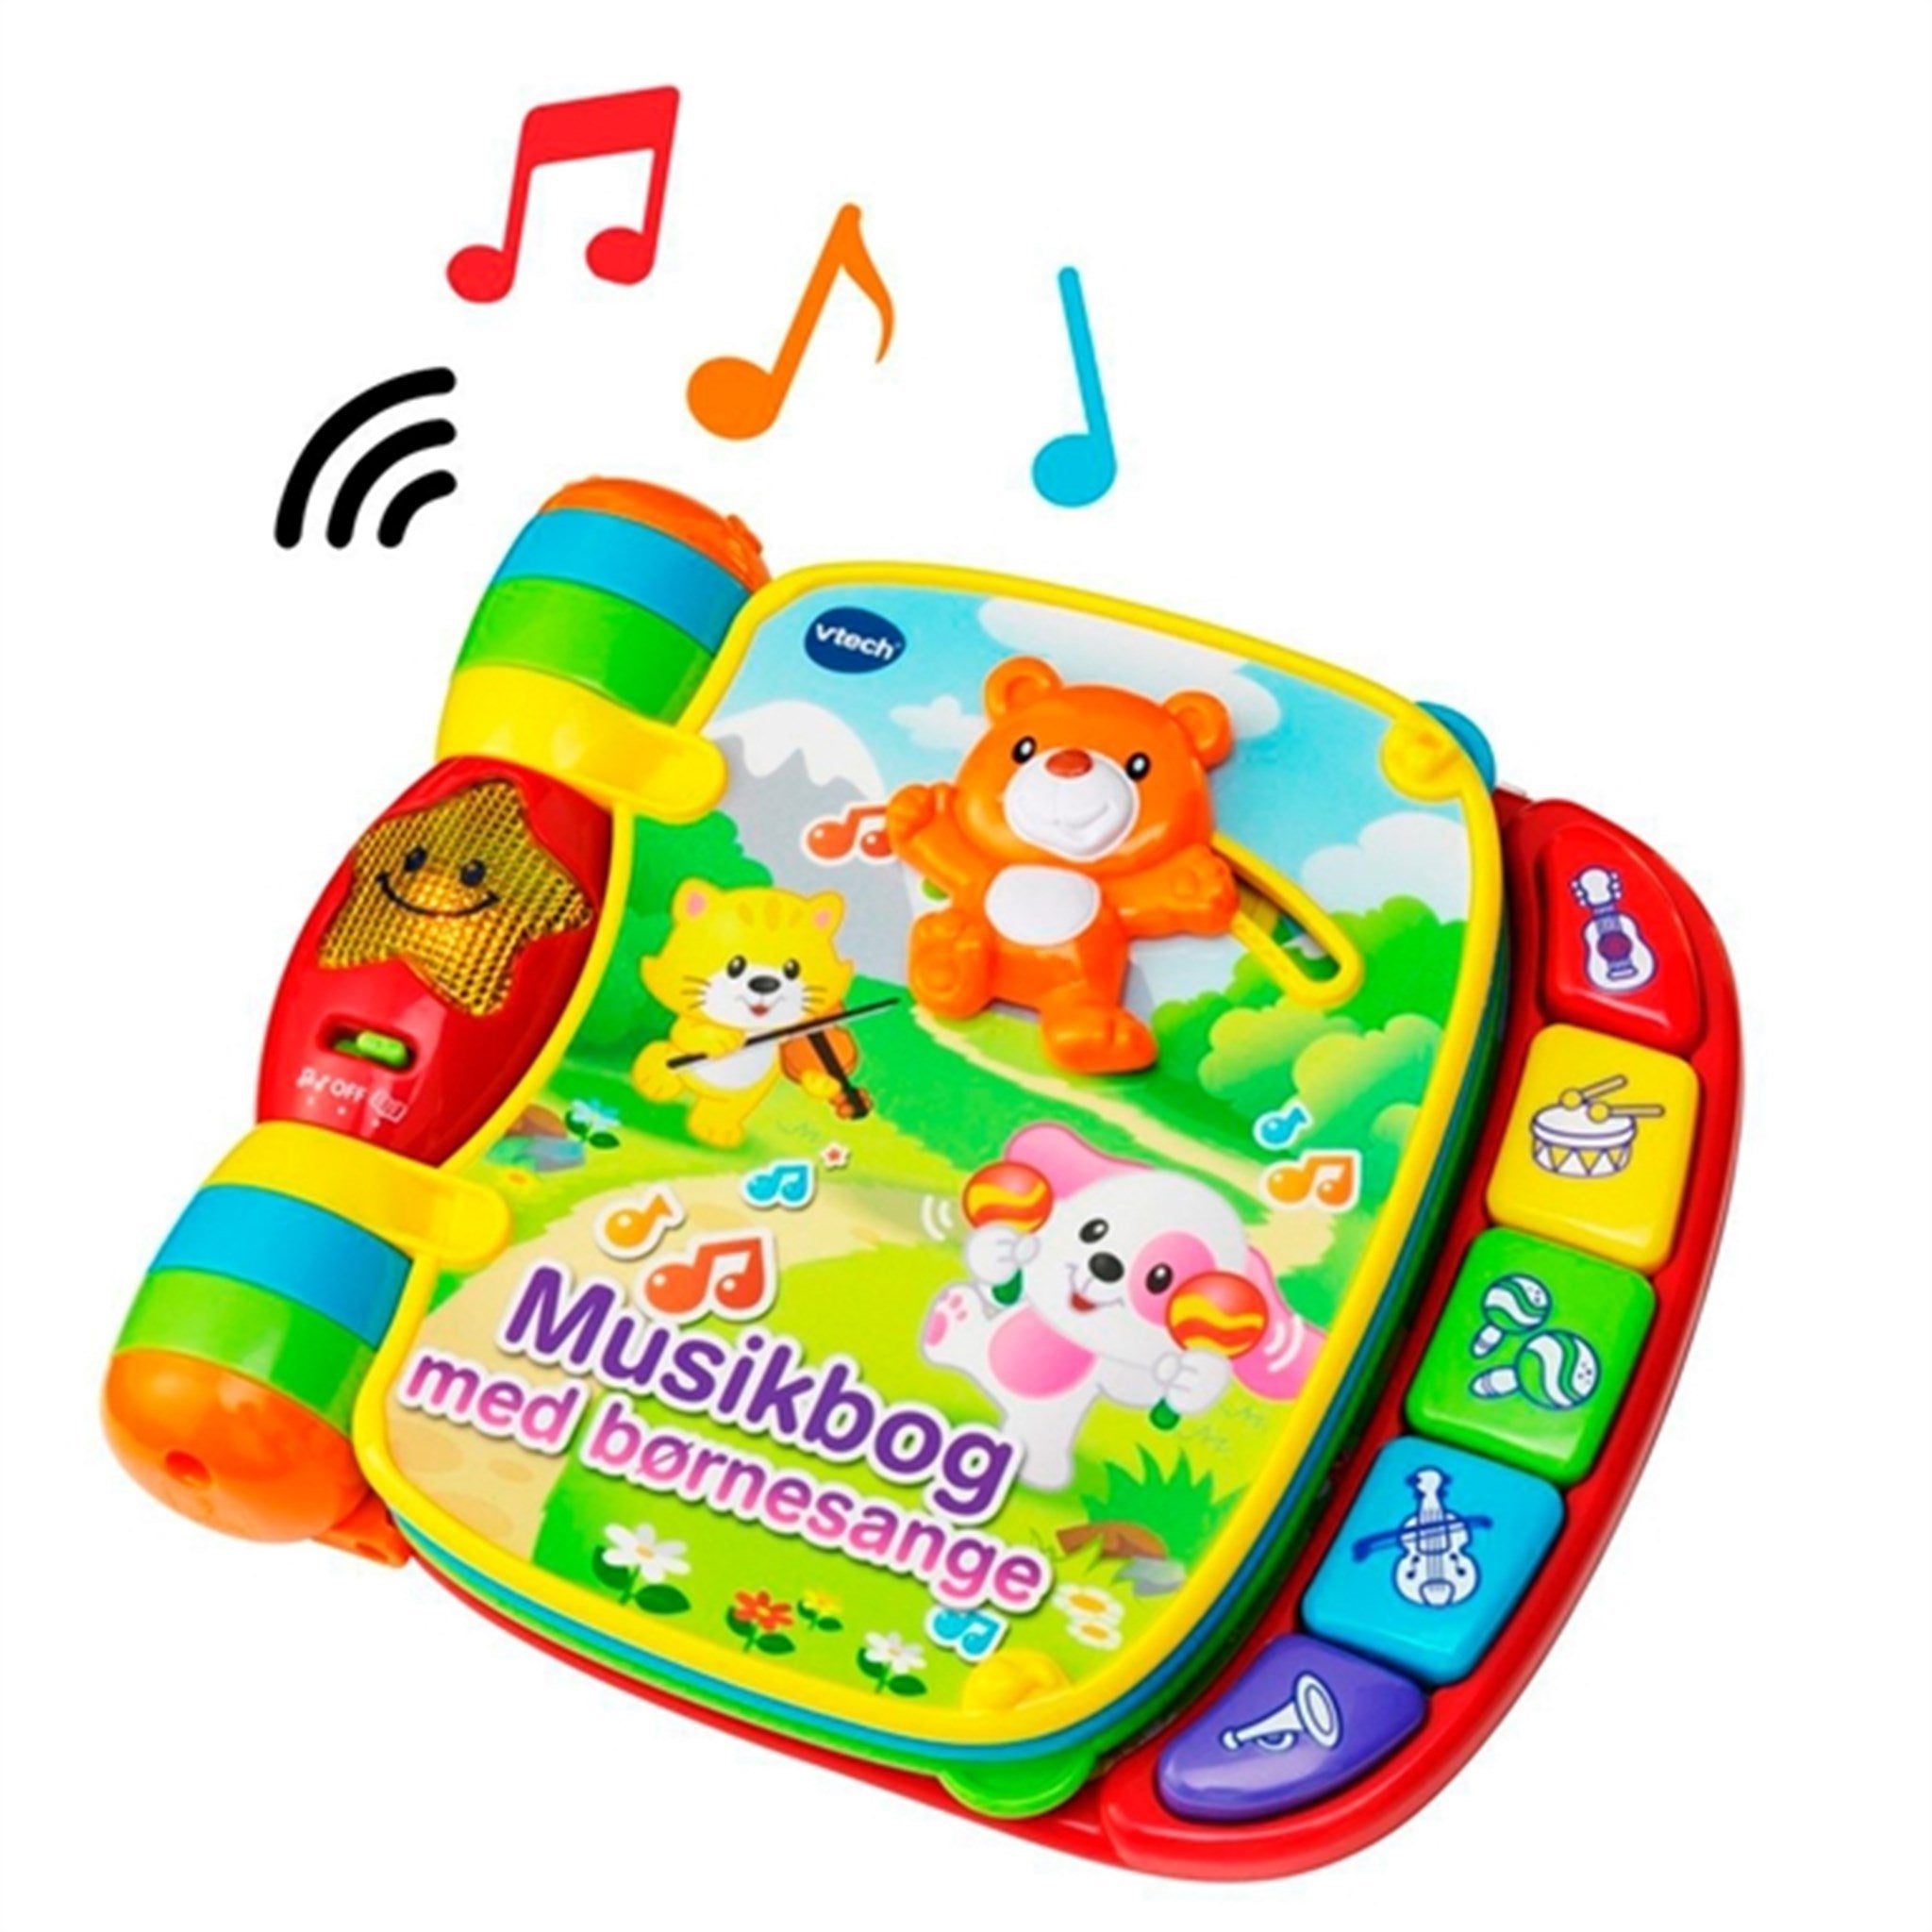 Vtech Baby Music book with Children's songs